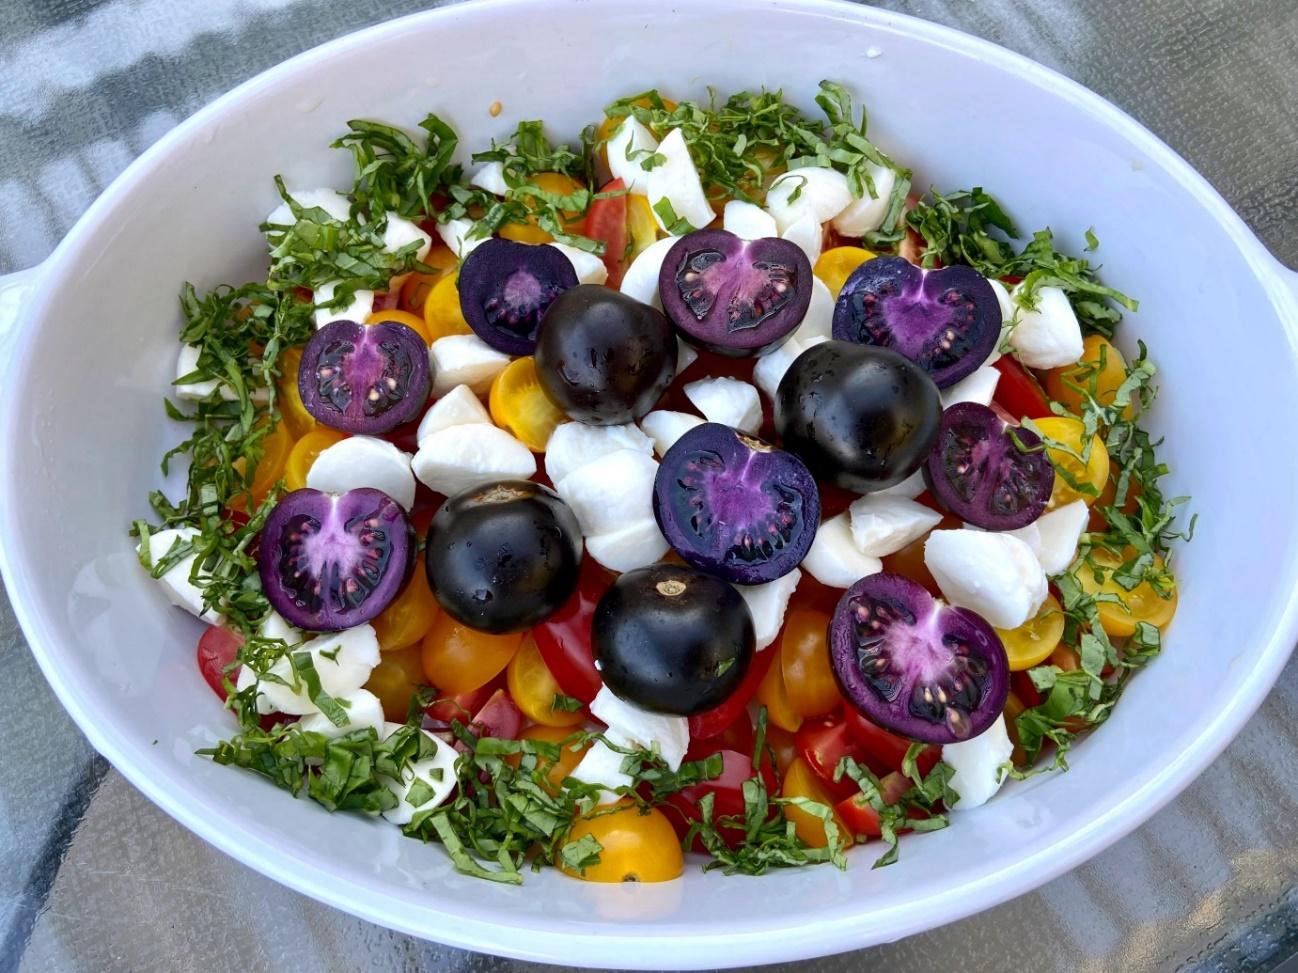 caprese salad in a bowl made with halved yellow, red and purple-fleshed cherry tomatoes